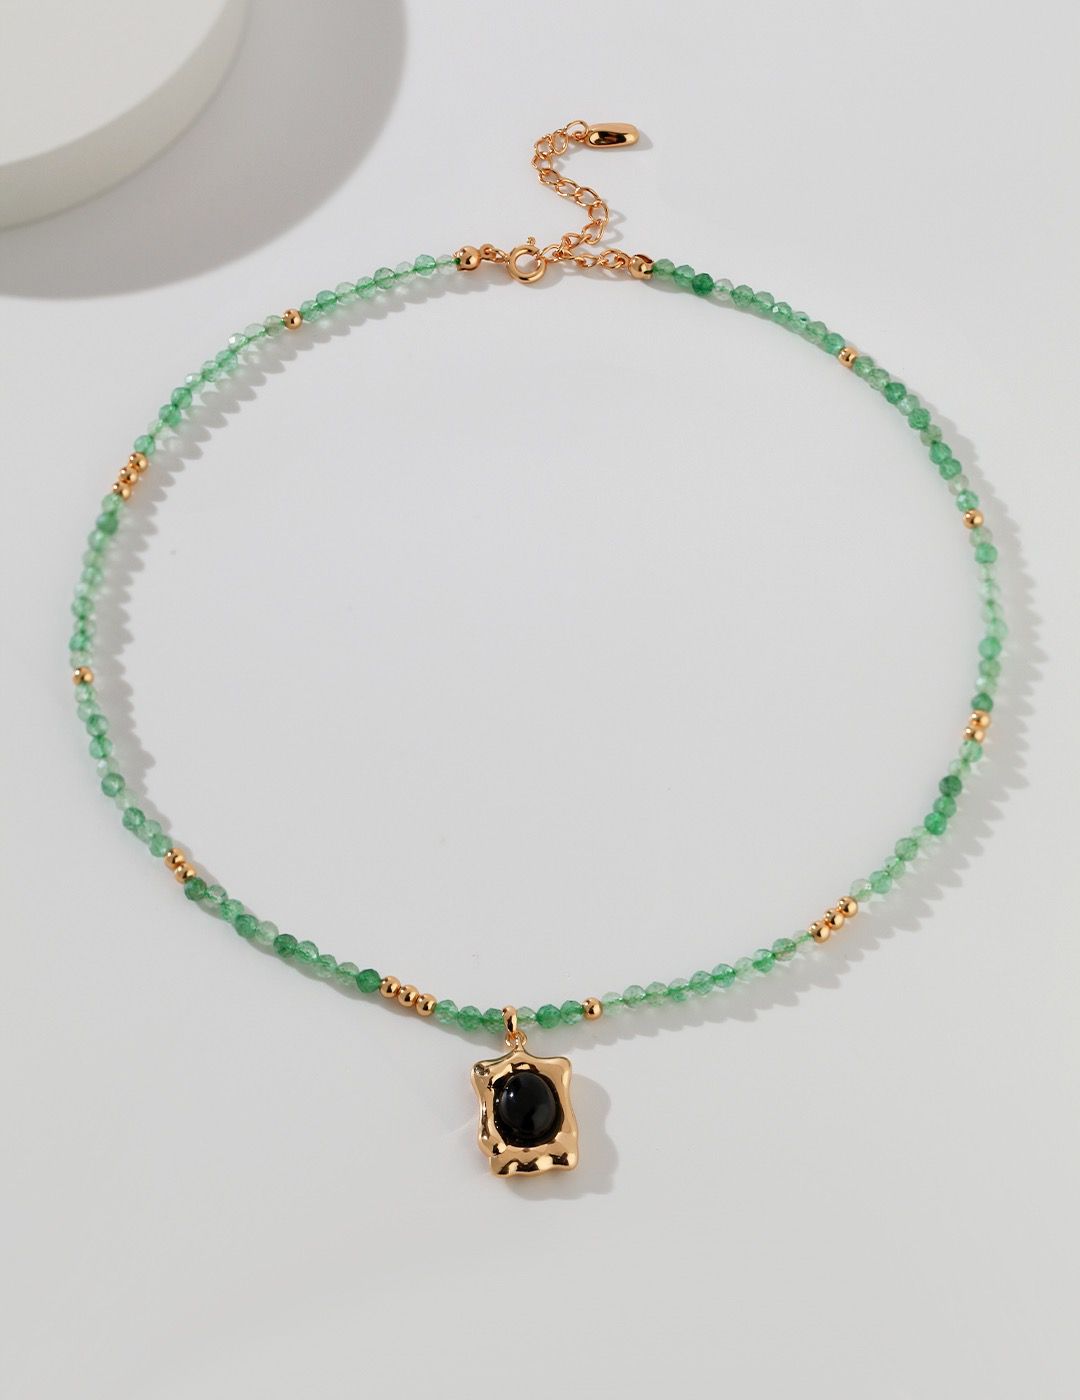 Natural agate beaded necklace featuring unique, hand-selected agate stones on a high-quality beading wire, finished with a clasp. This necklace is perfect for adding a touch of natural beauty to your jewelry collection.